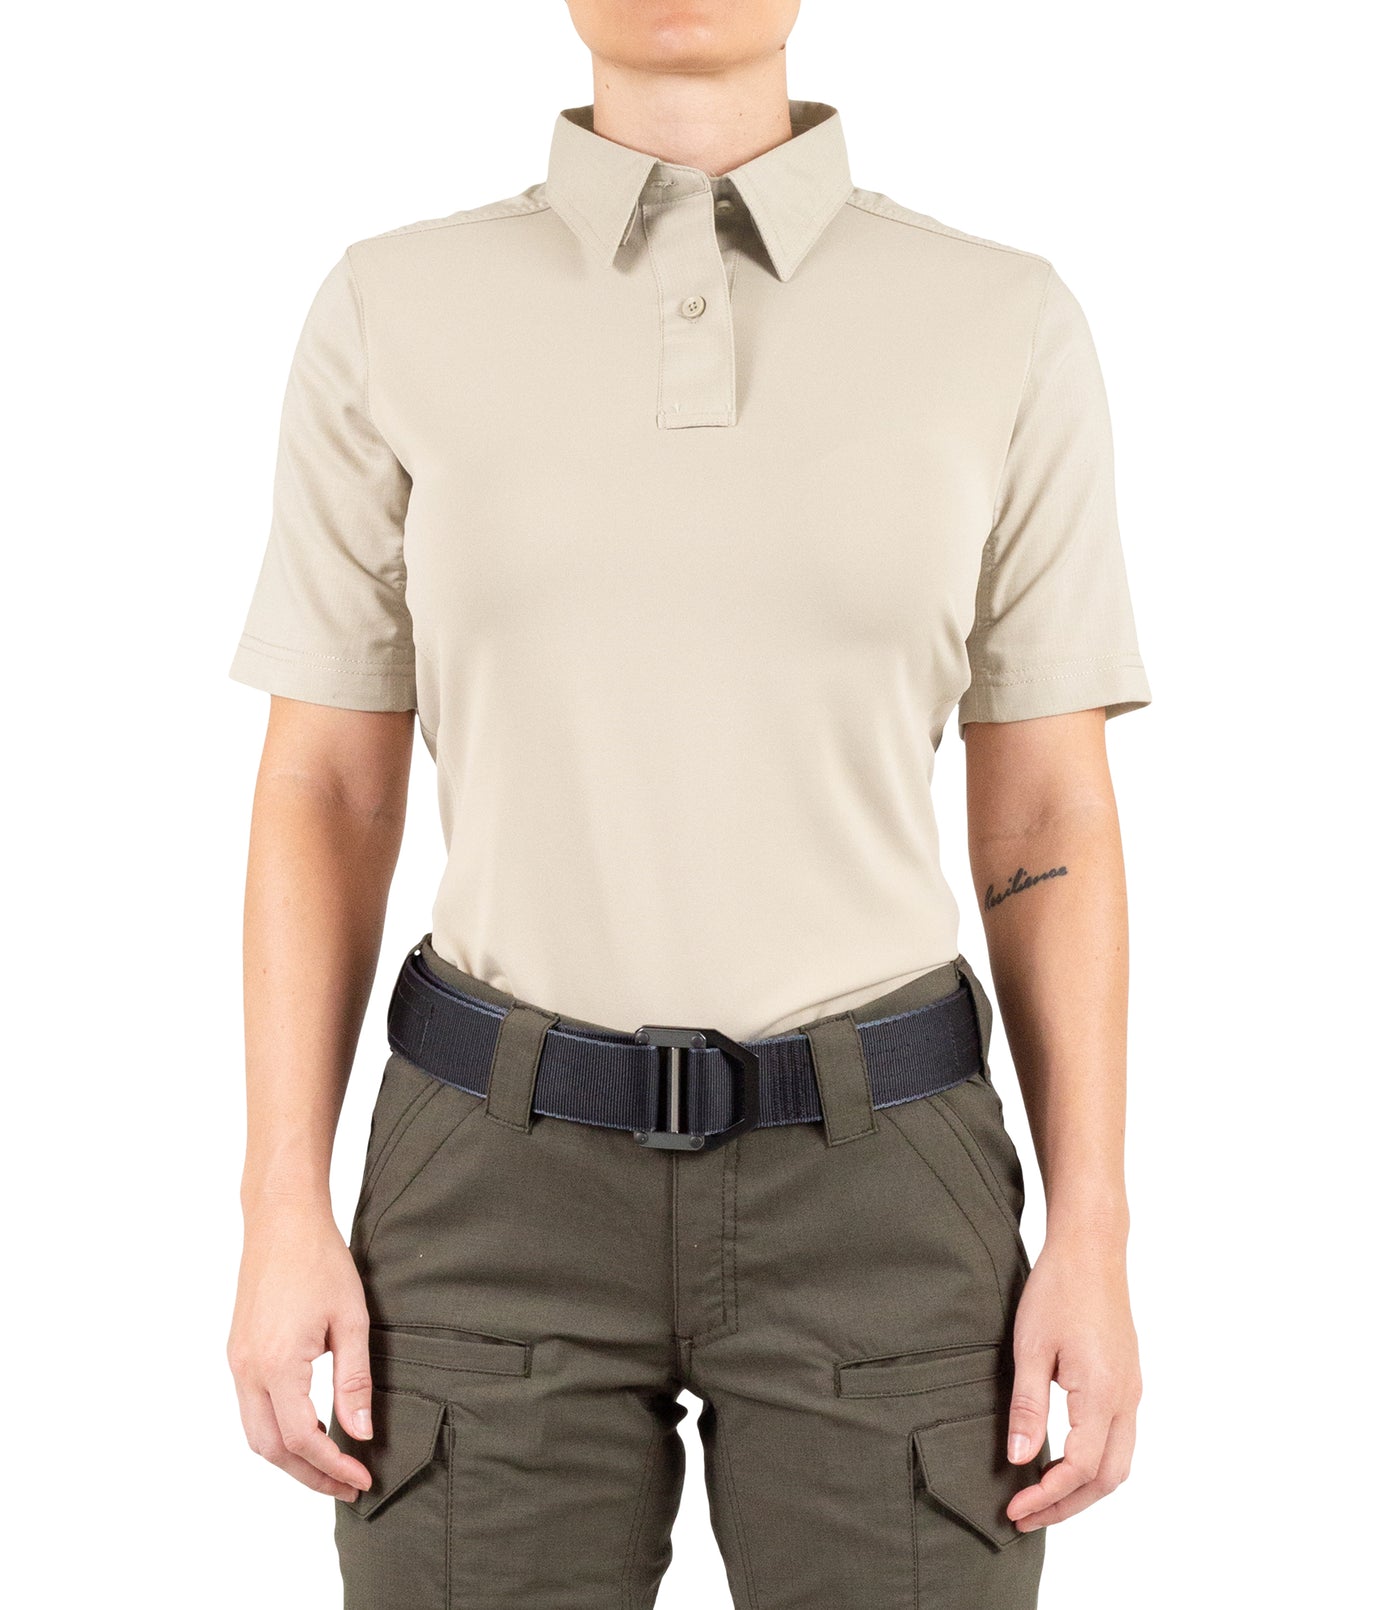 Front of Women's V2 Pro Performance Short Sleeve Shirt in Silver Tan